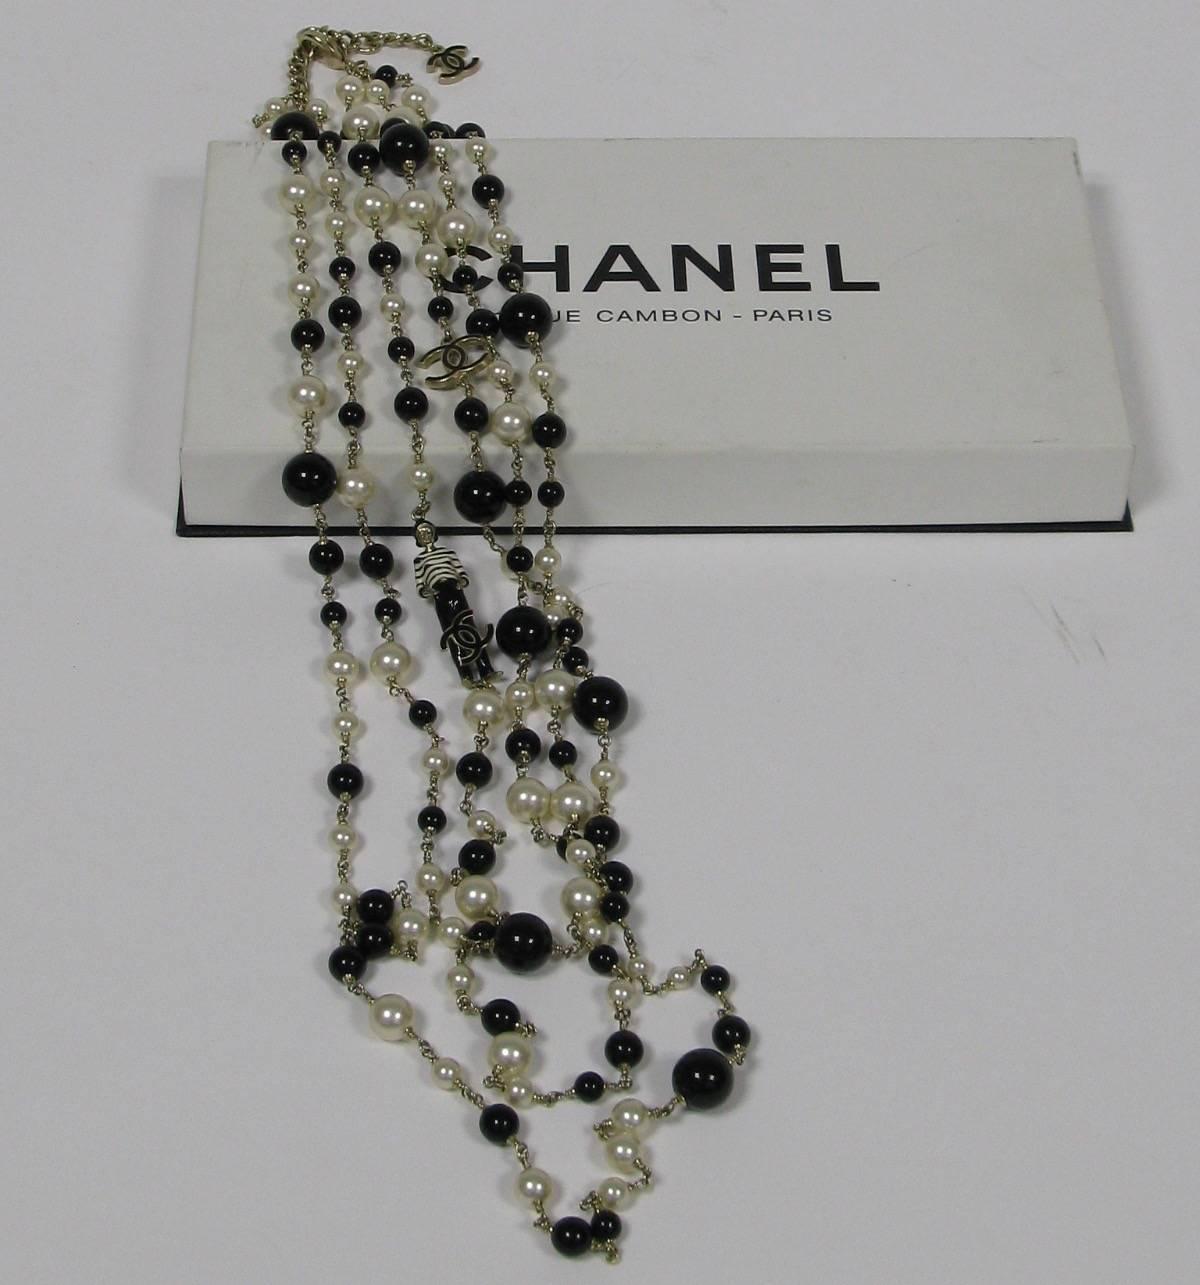 CHANEL Multi-Row Necklace in Black and White Pearls, CC and Coco Figurine 1